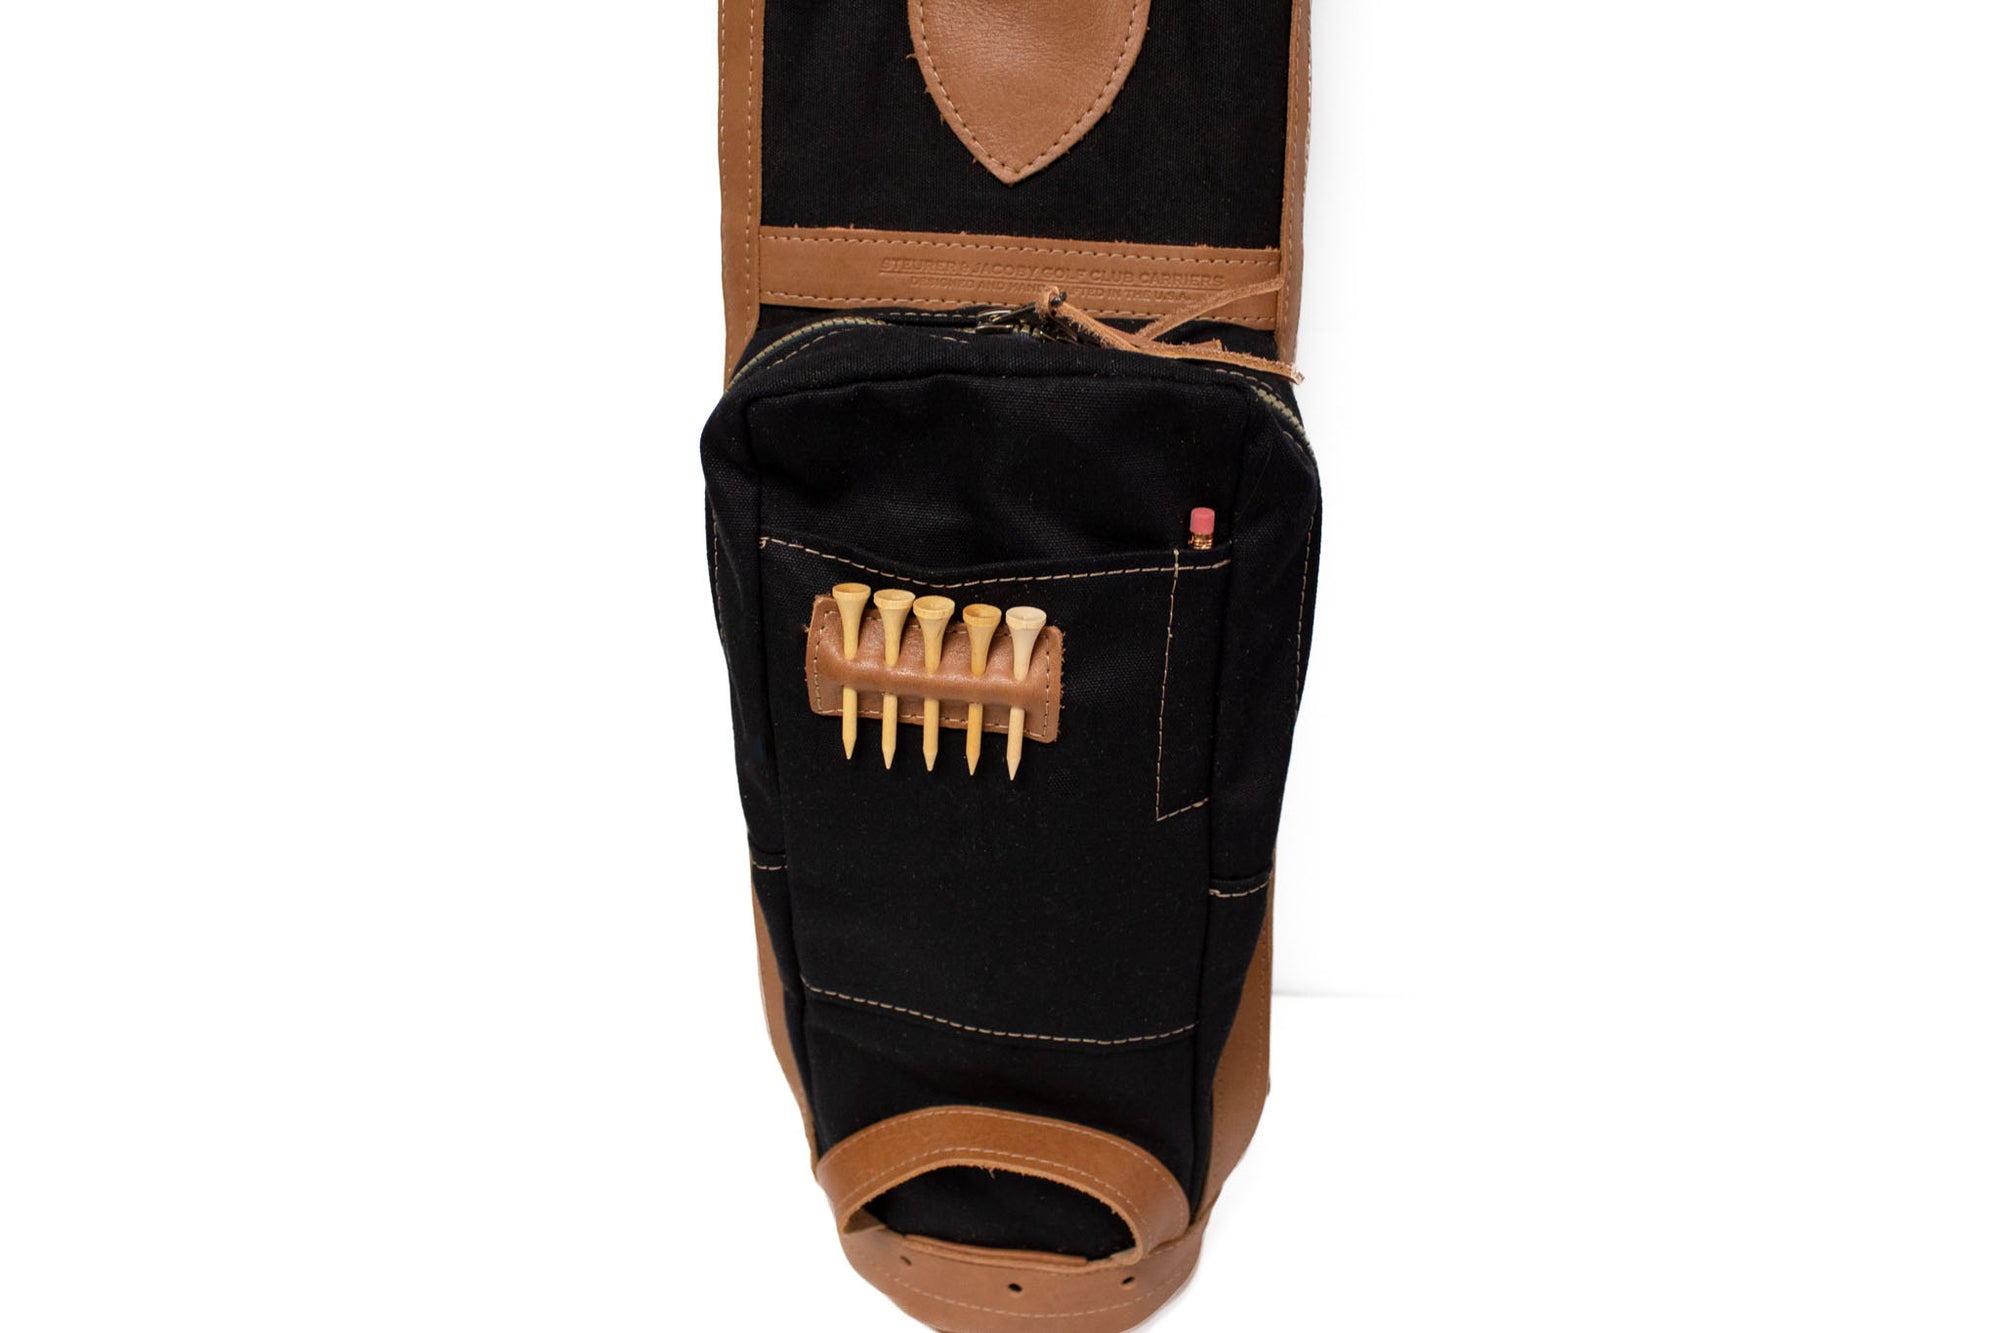 Black and Natural Pencil Style Golf Bag- Steurer & Jacoby